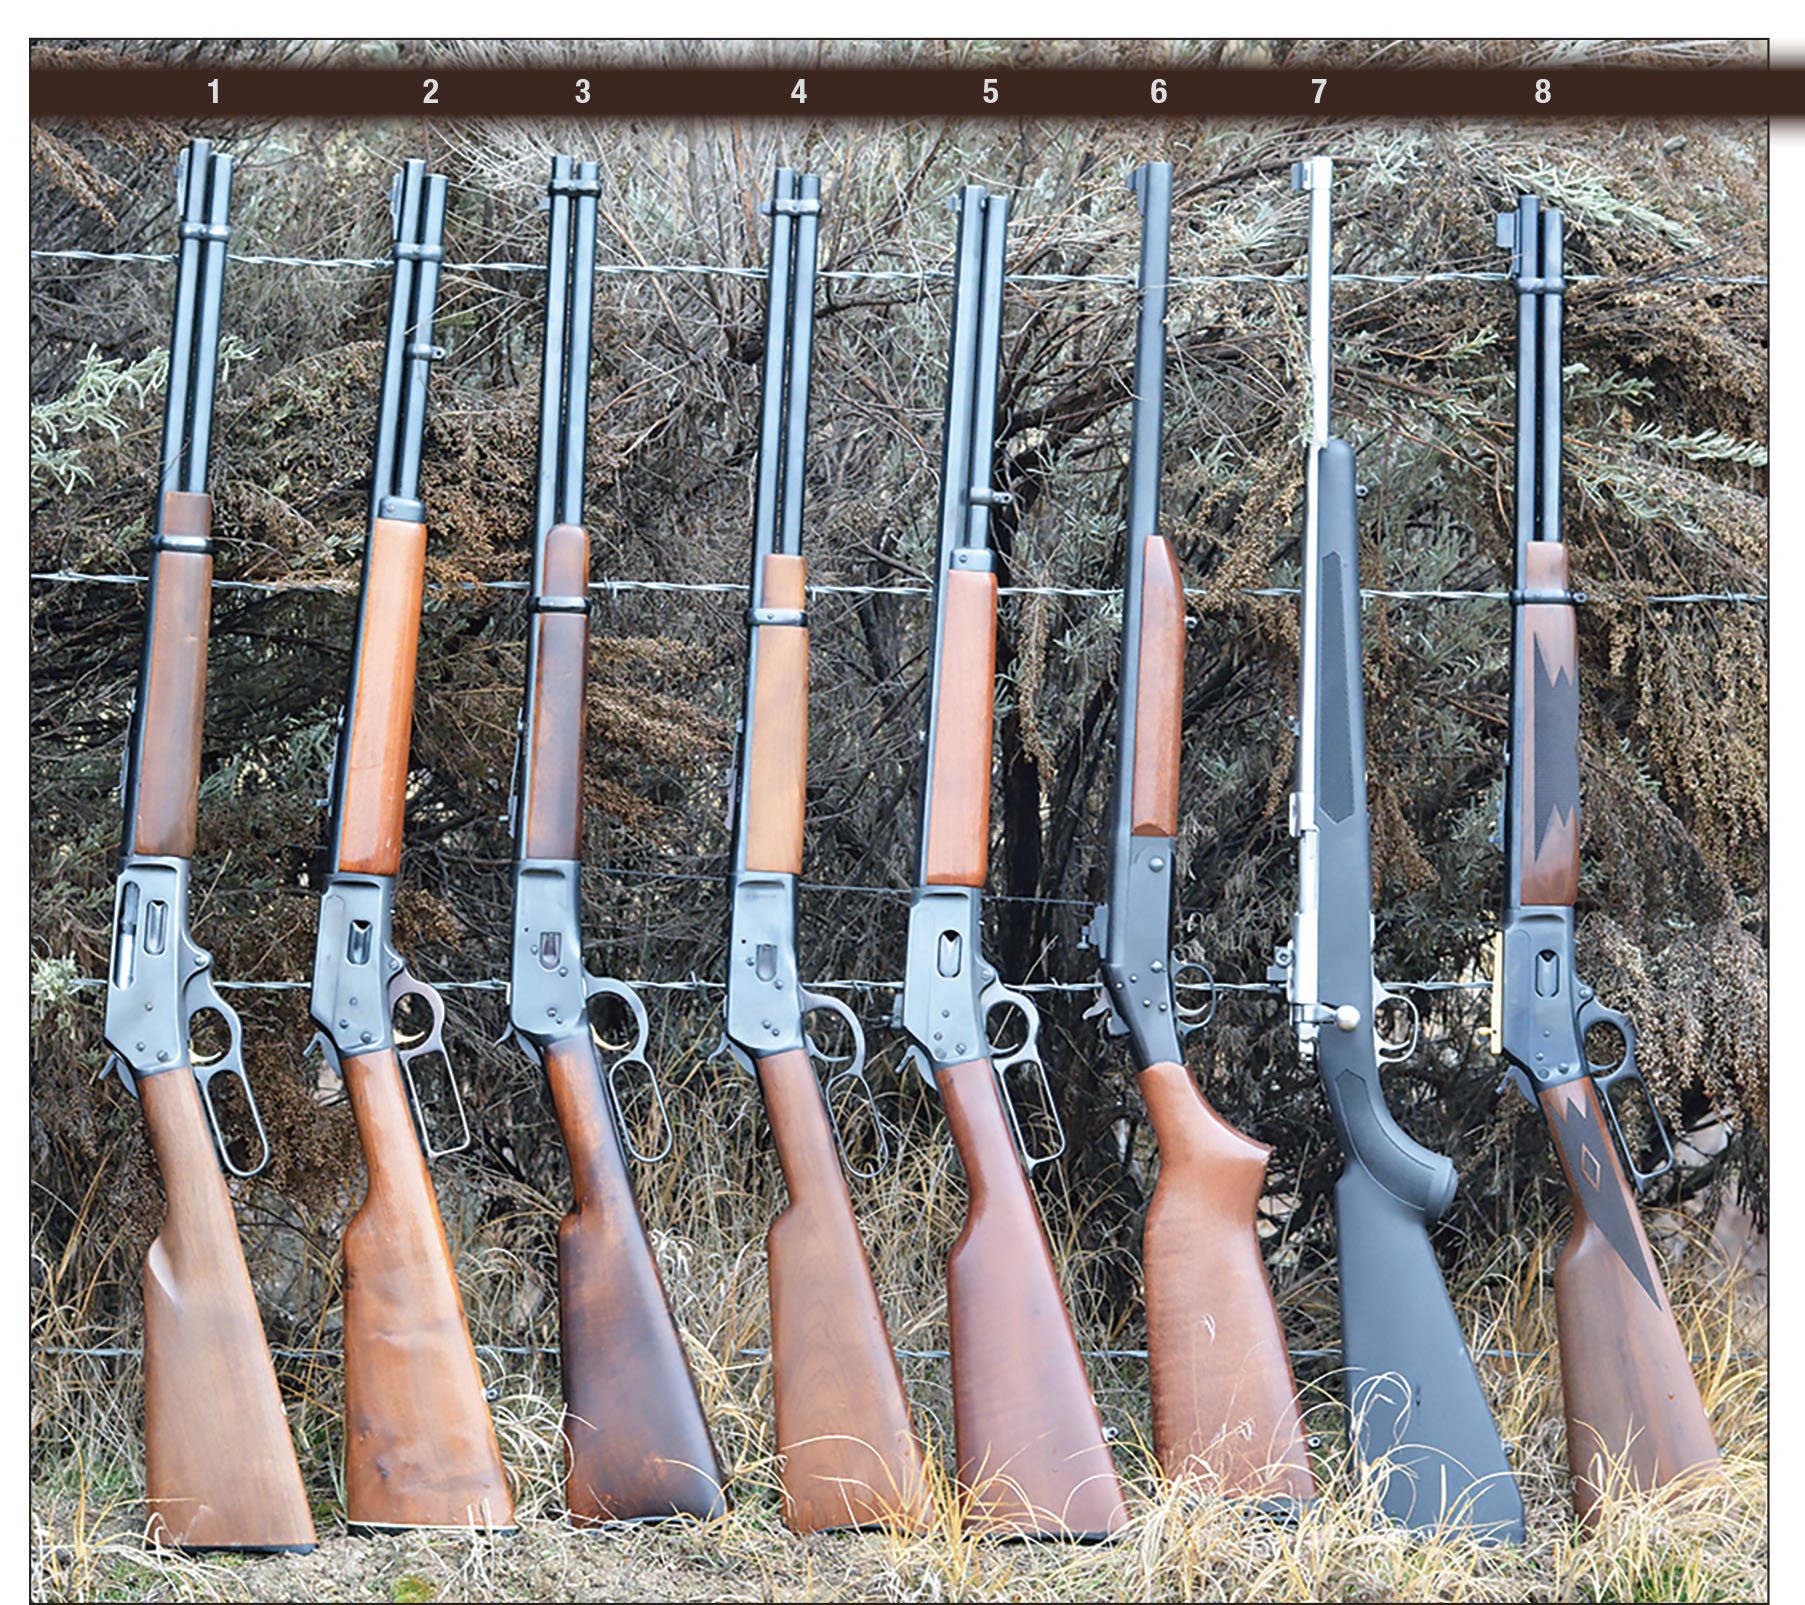 Beginning in 1959, the 44 Magnum has been chambered in a huge variety of rifles. Examples include from left to right; (1) Marlin 336-44, (2) Marlin 1894, (3) Browning B-92 manufactured by Miroku, (4) Rossi/Puma 92, (5) Marlin 1894 Cowboy Limited, (6) New England Handi Rifle, (7) Ruger 77/44 and (8) Ruger produced Marlin 1894 Classic.